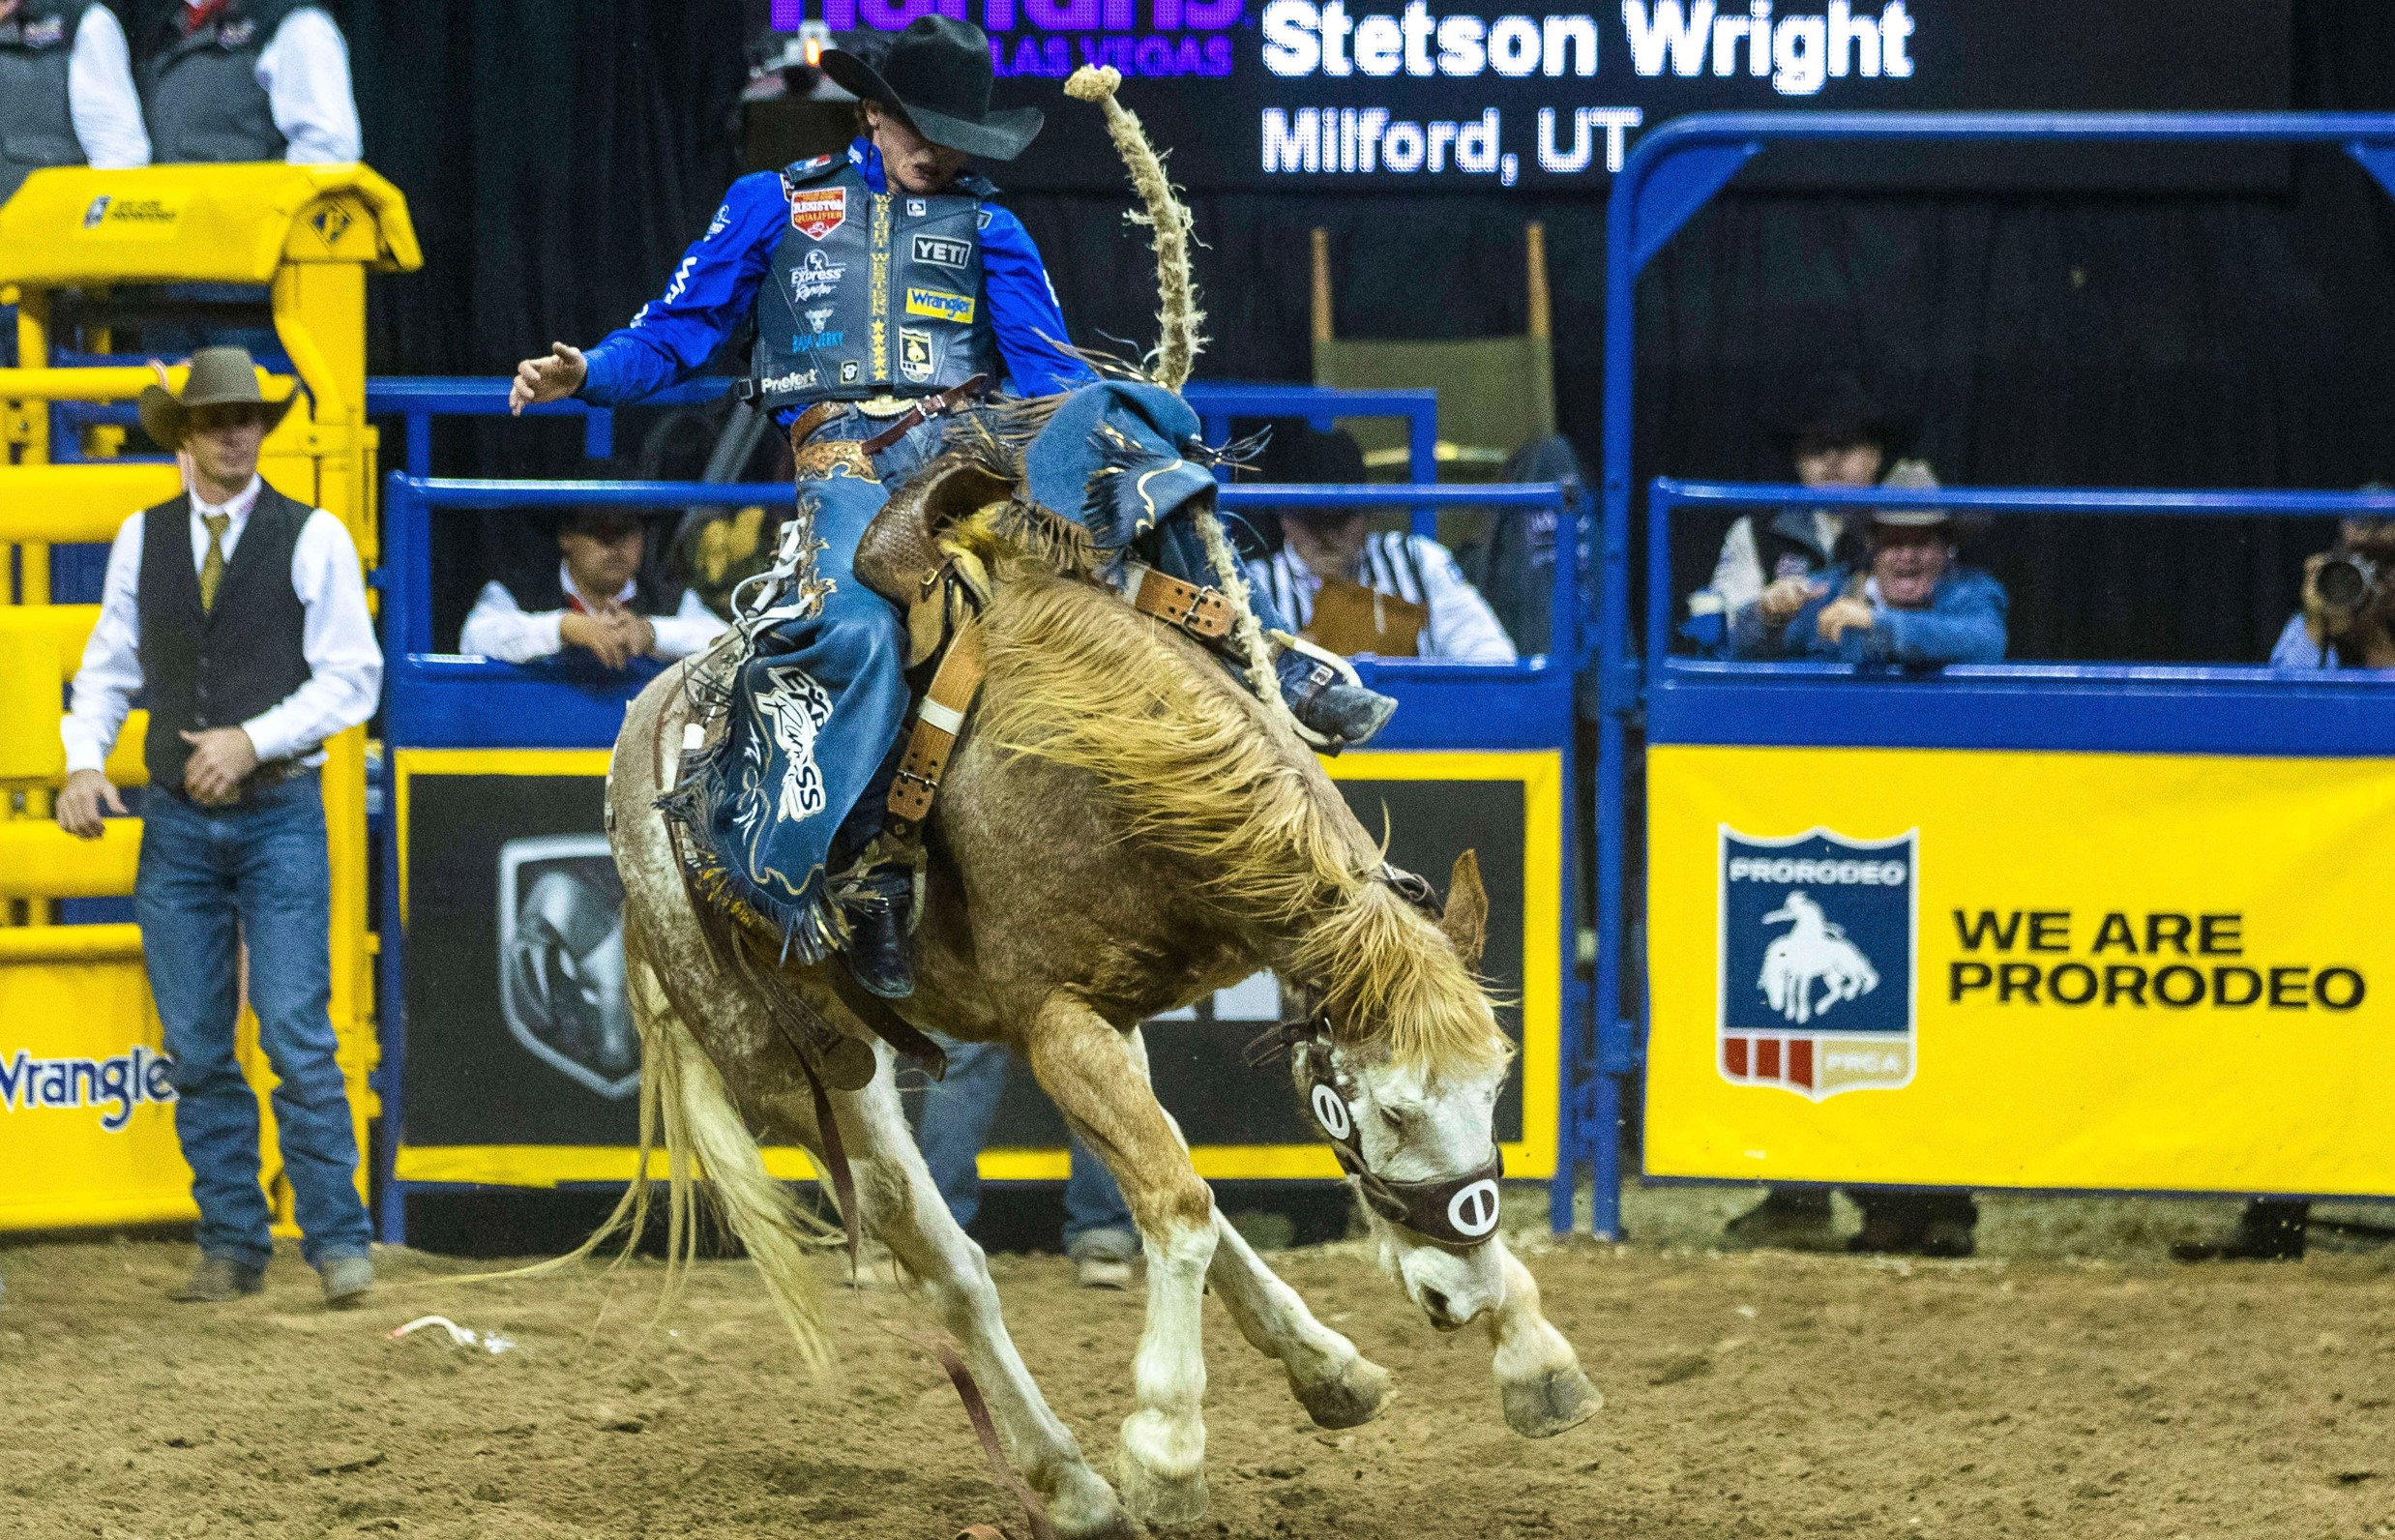 NFR title races take shape heading into final go-round Saturday | Las Vegas  Review-Journal